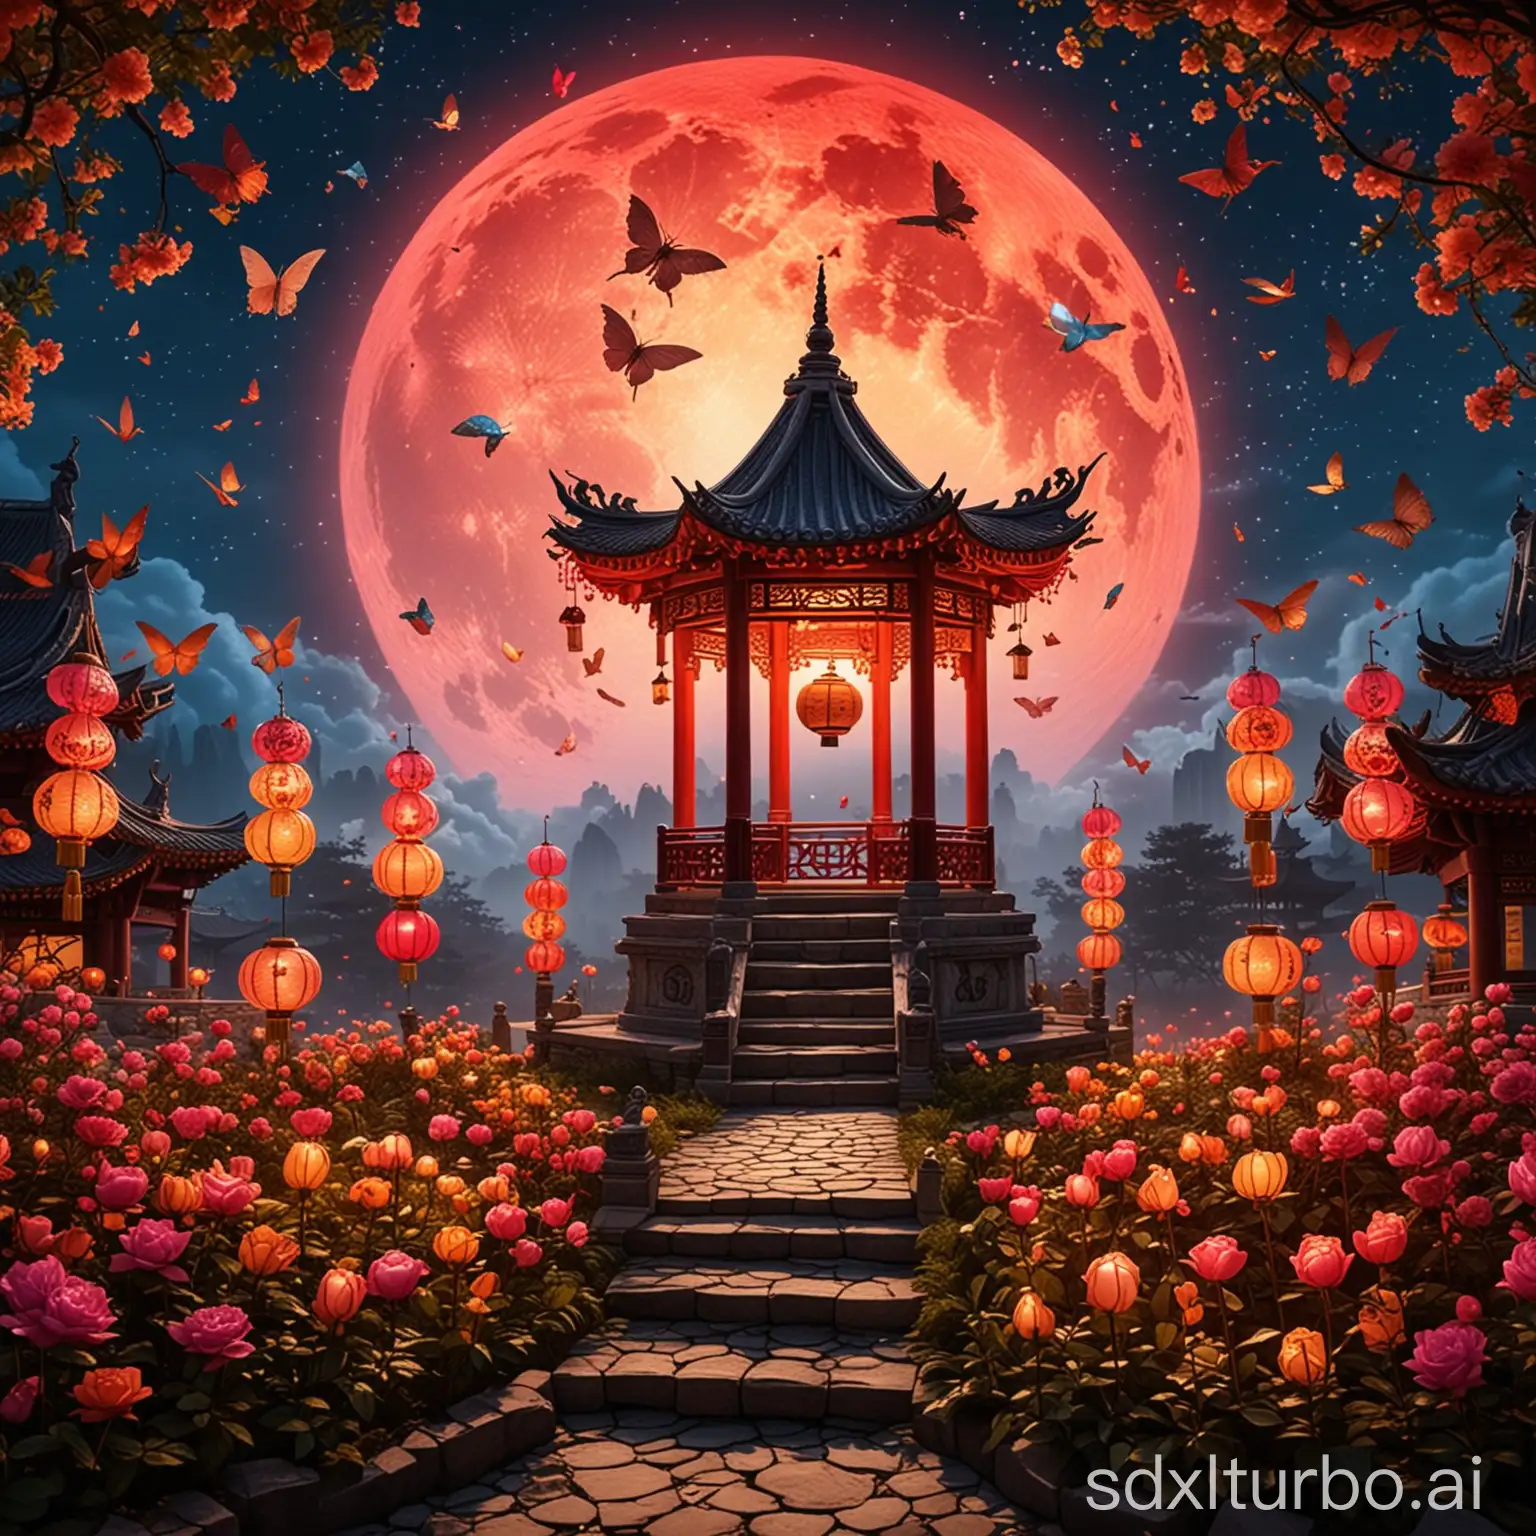 Enchanting-Chinese-Lantern-Festival-Blooming-Rose-and-Mythical-Figures